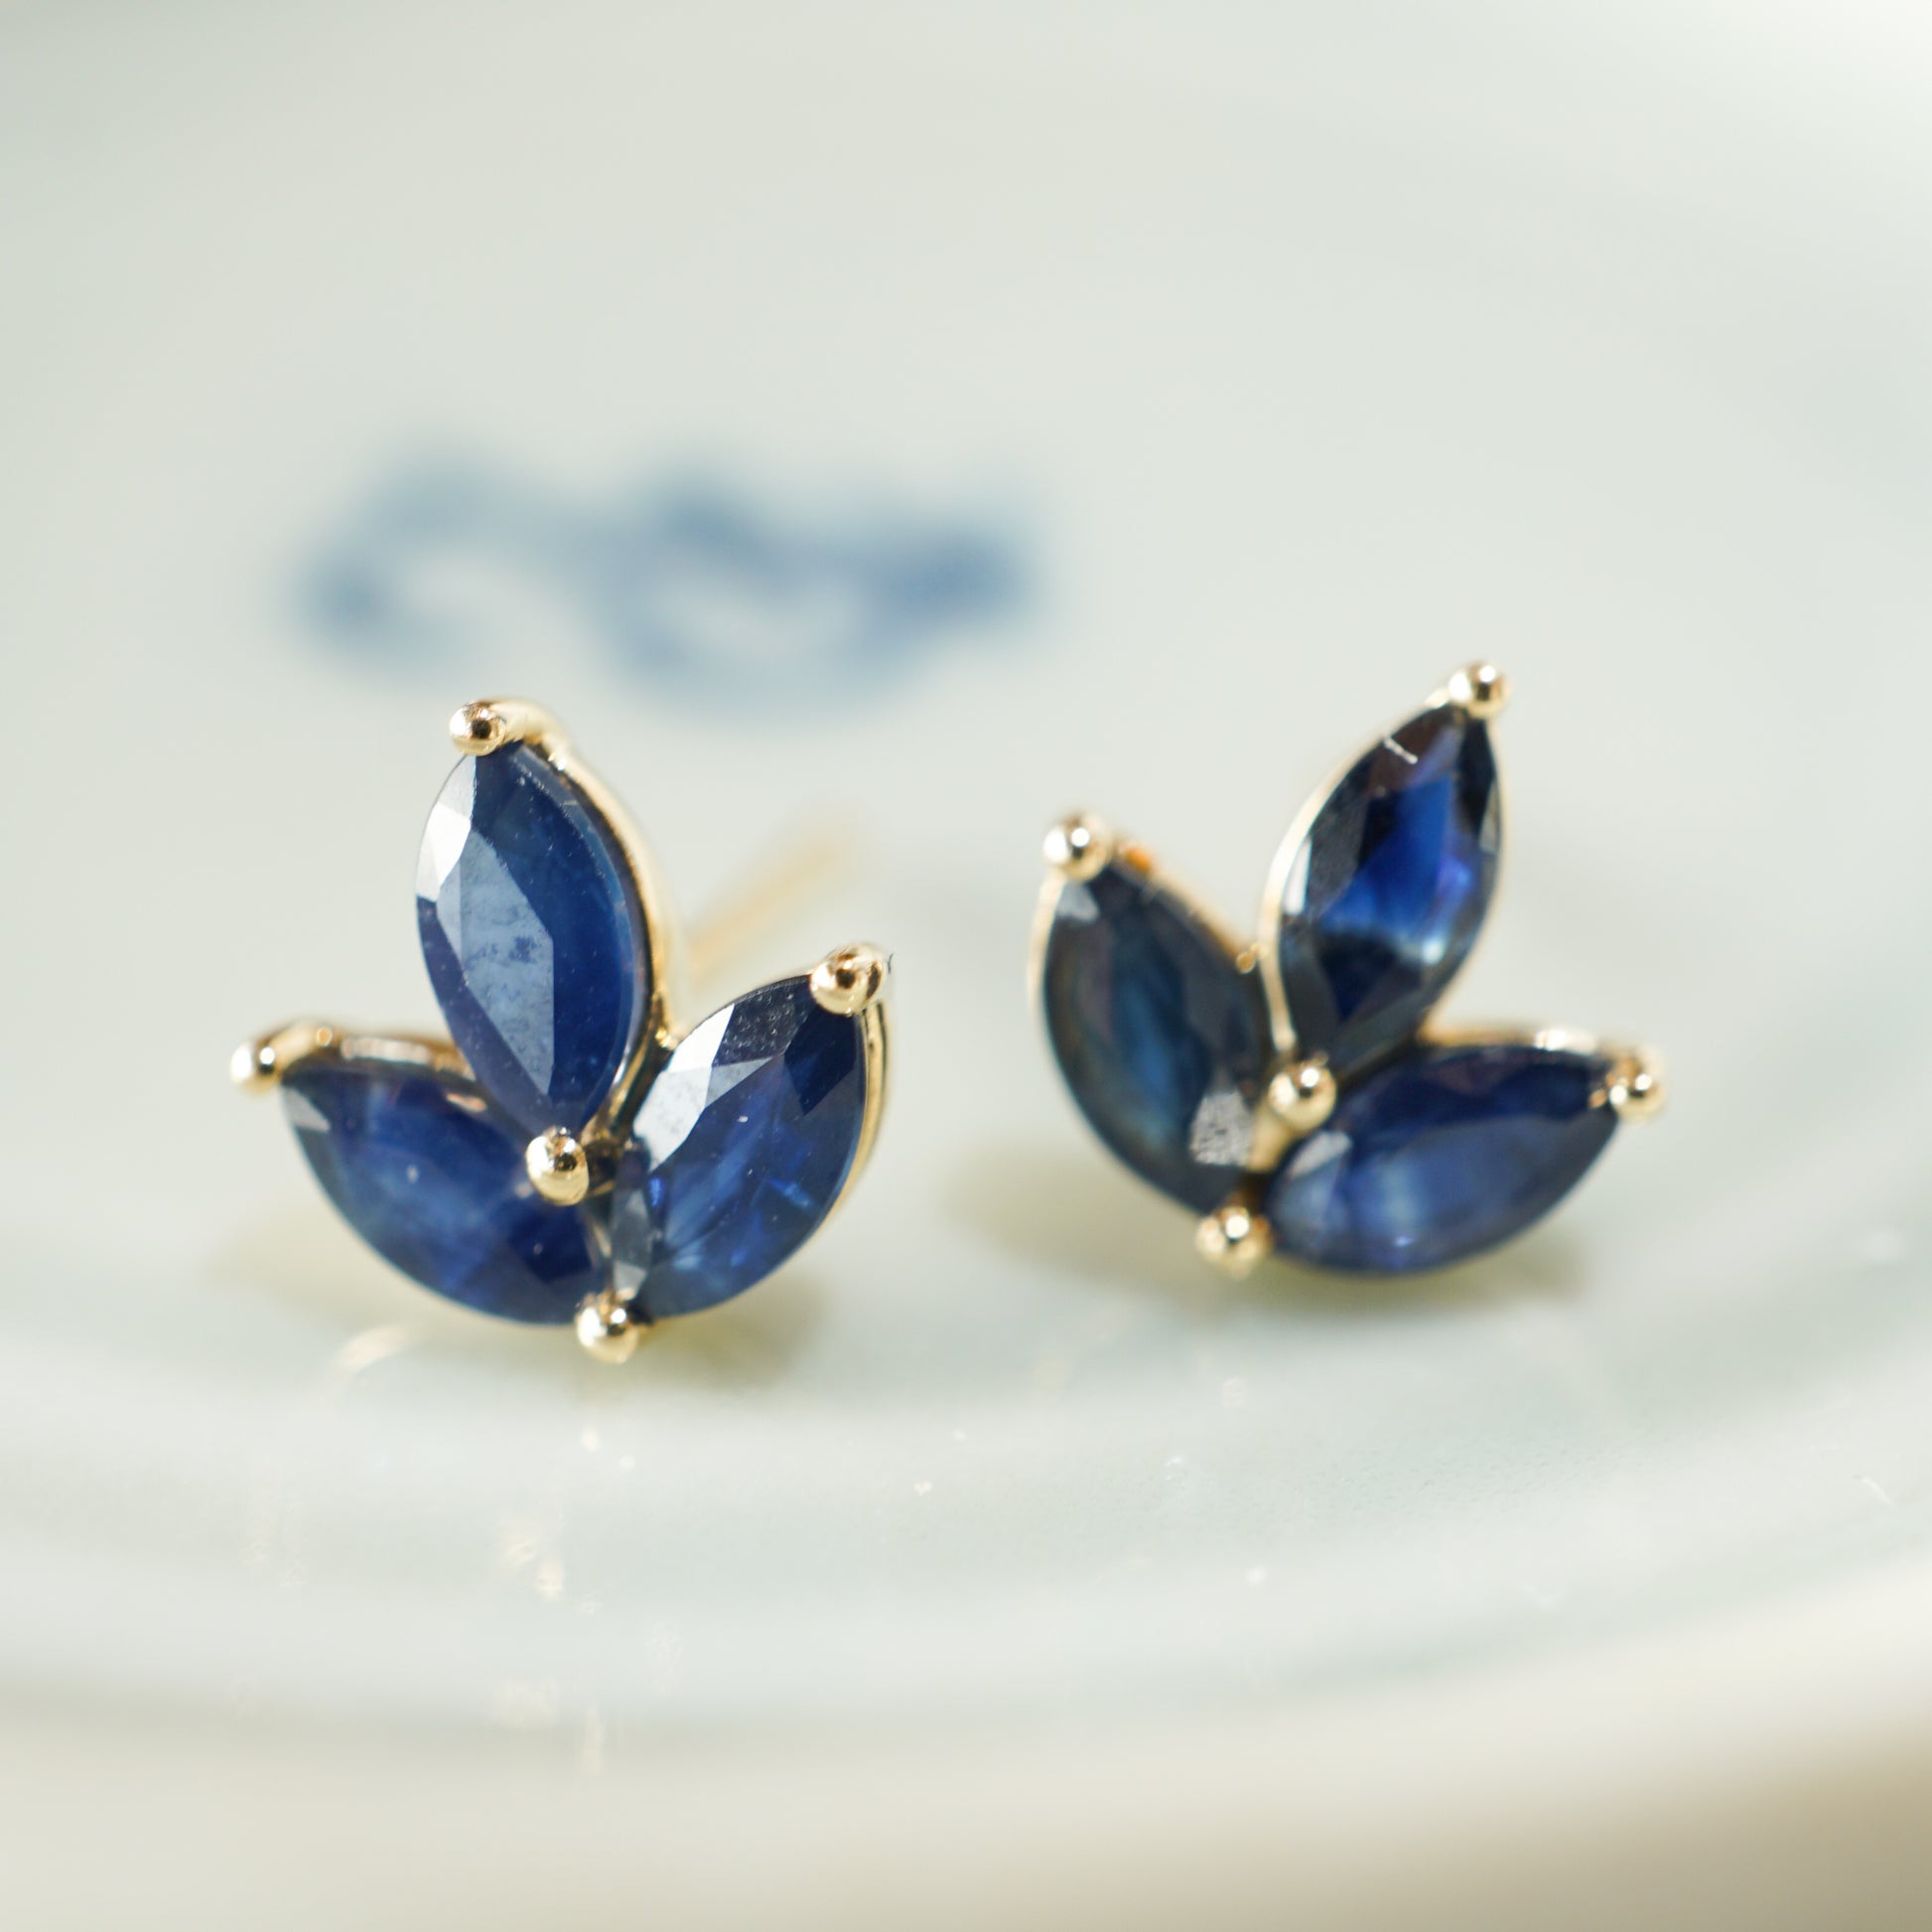 Marquise Cut Sapphire Stud Earrings in 14k Yellow GoldComposition: PlatinumTotal Gram Weight: 1.3 gInscription: 14k